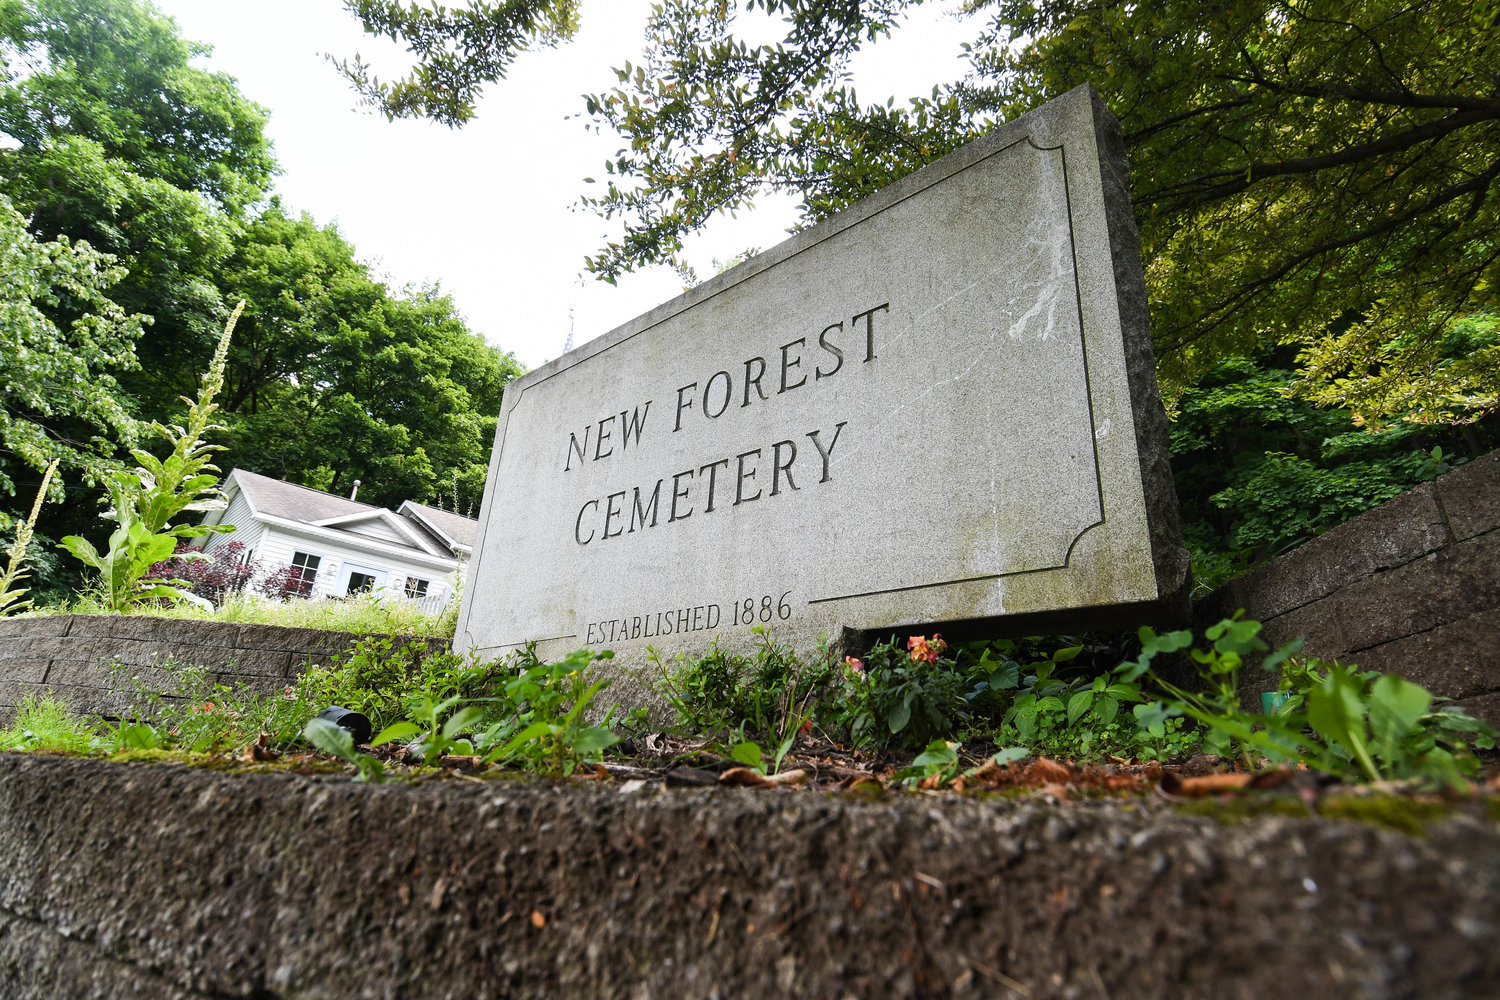 New Forest Cemetery in Utica. Local officials, state representatives, stakeholders, and members of the New York State Department of State-Division of Cemeteries toured the cemetary on Tuesday.